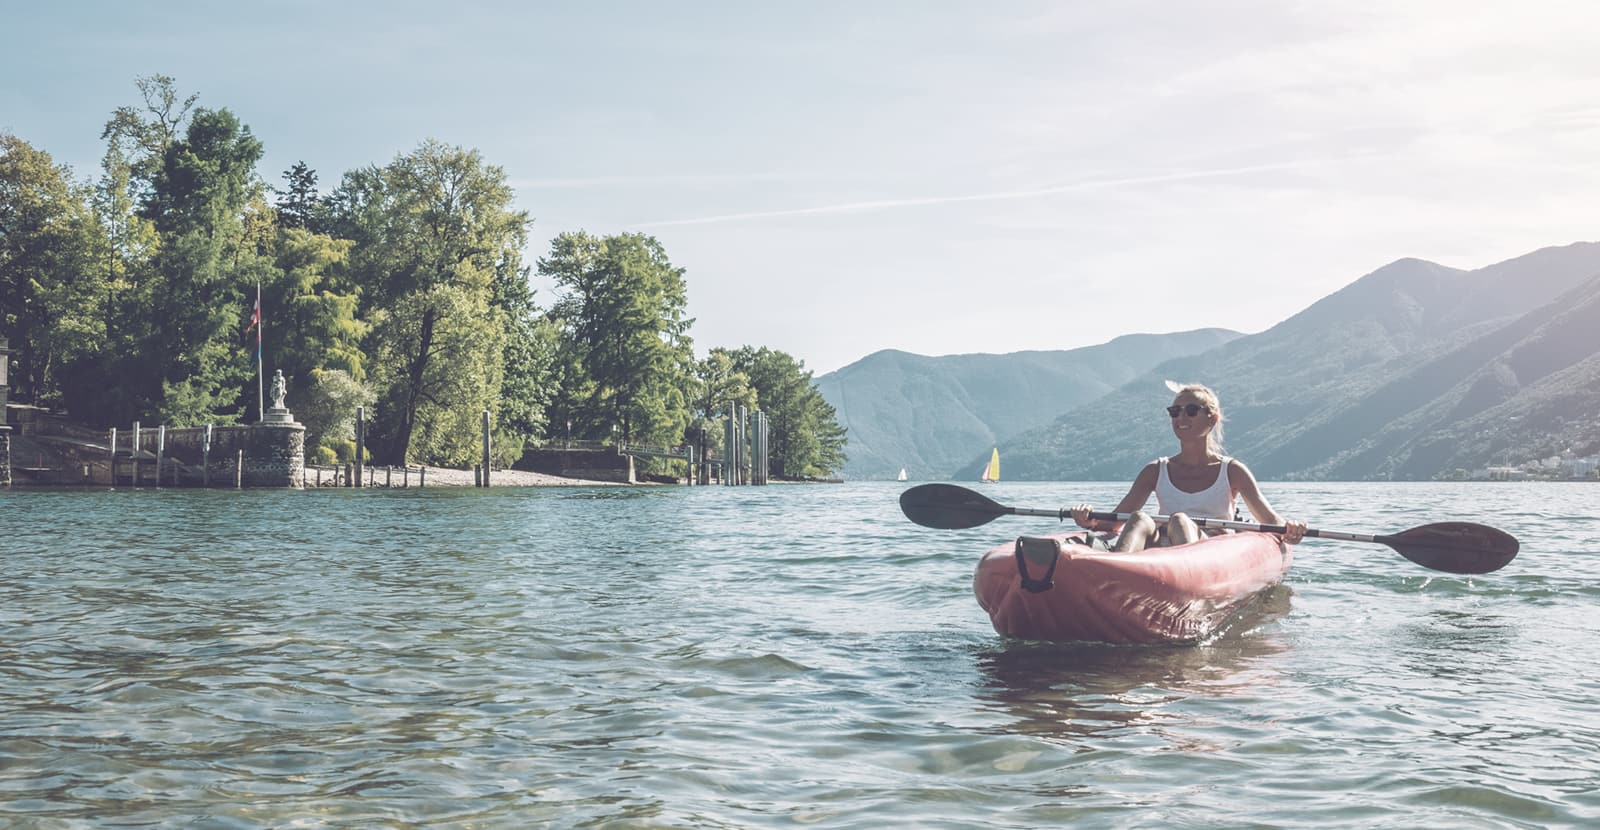 A woman kayaking on a lake in a picturesque mountain setting